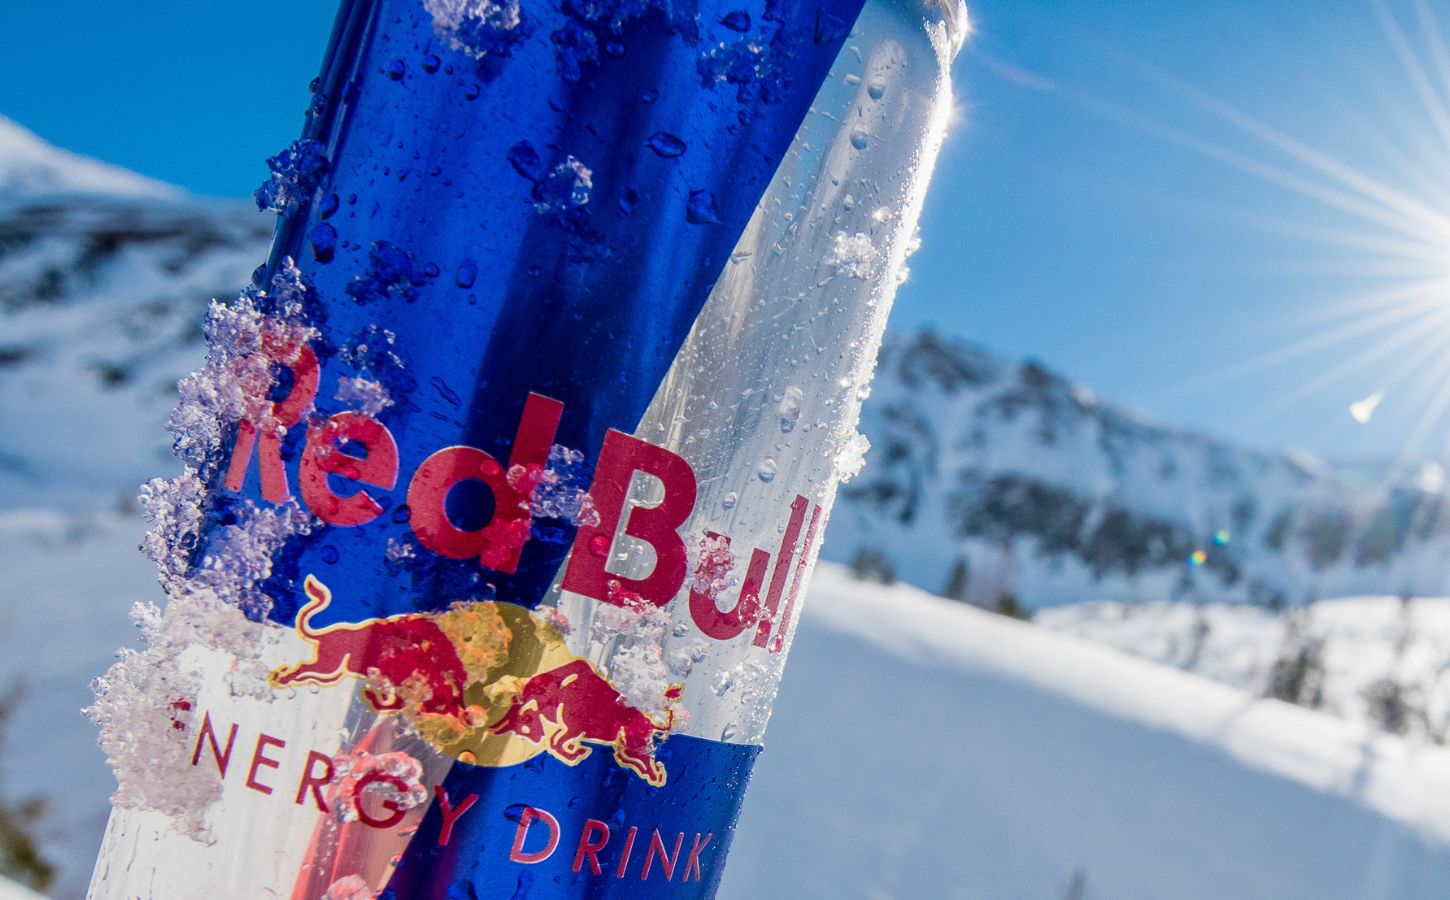 A can of Red Bull covered in ice